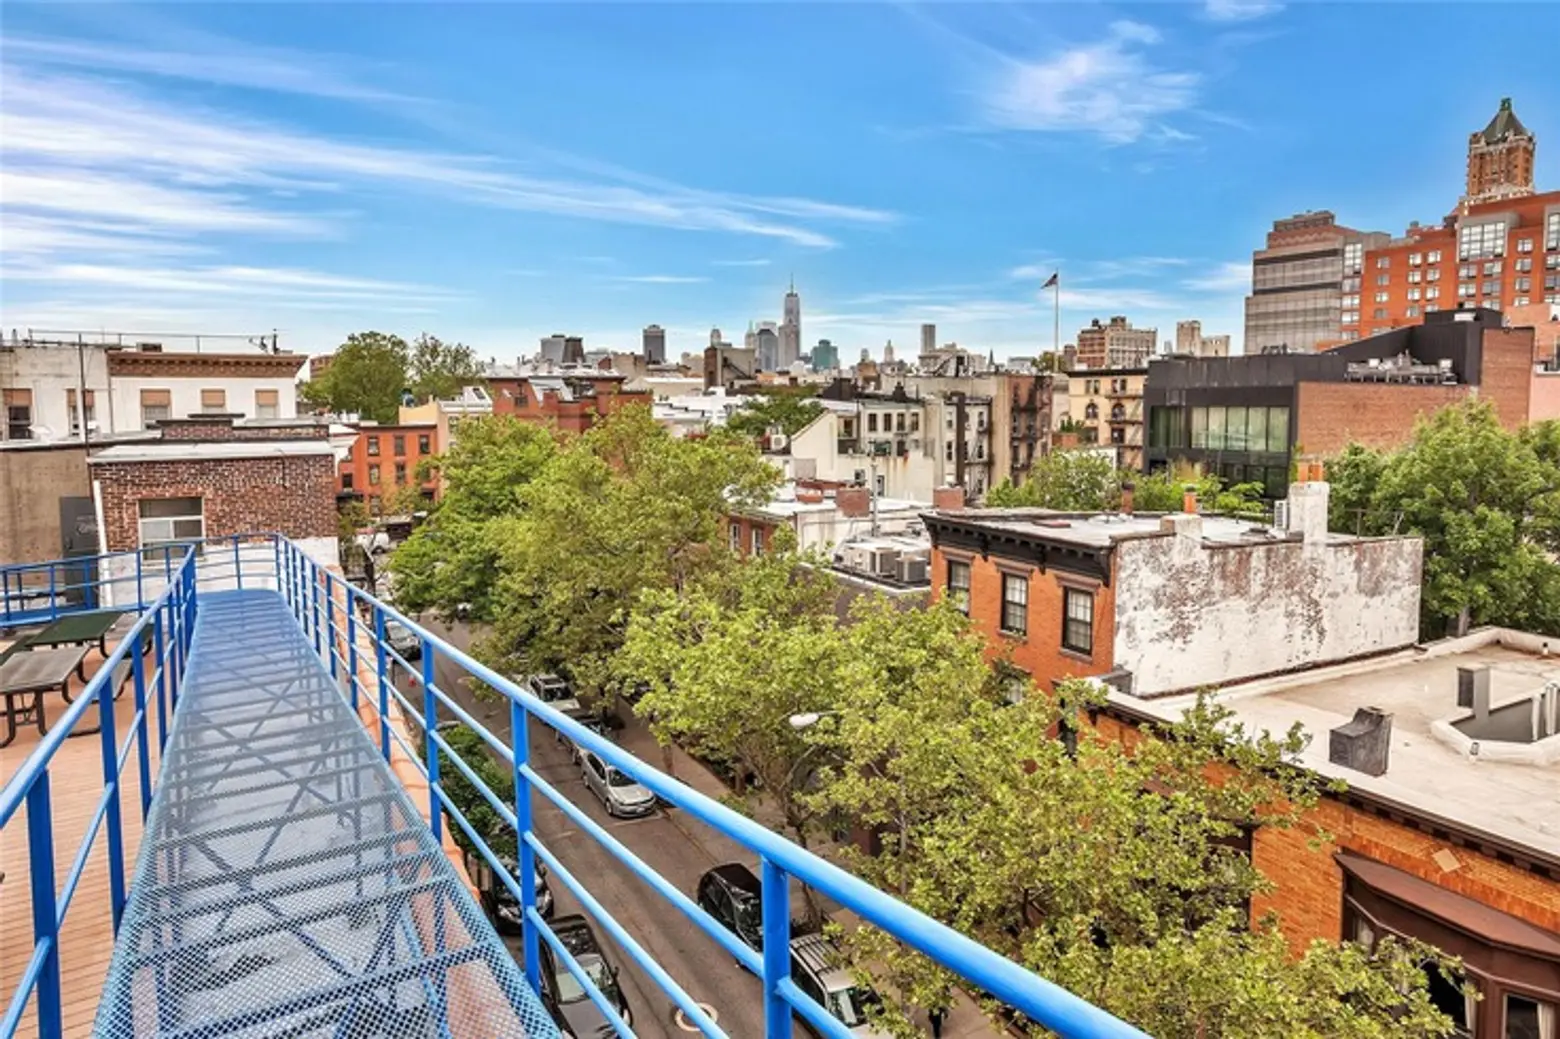 Boerum Hill Apartment with a One-of-a-Kind Rooftop “Skytrack” Selling for $795K